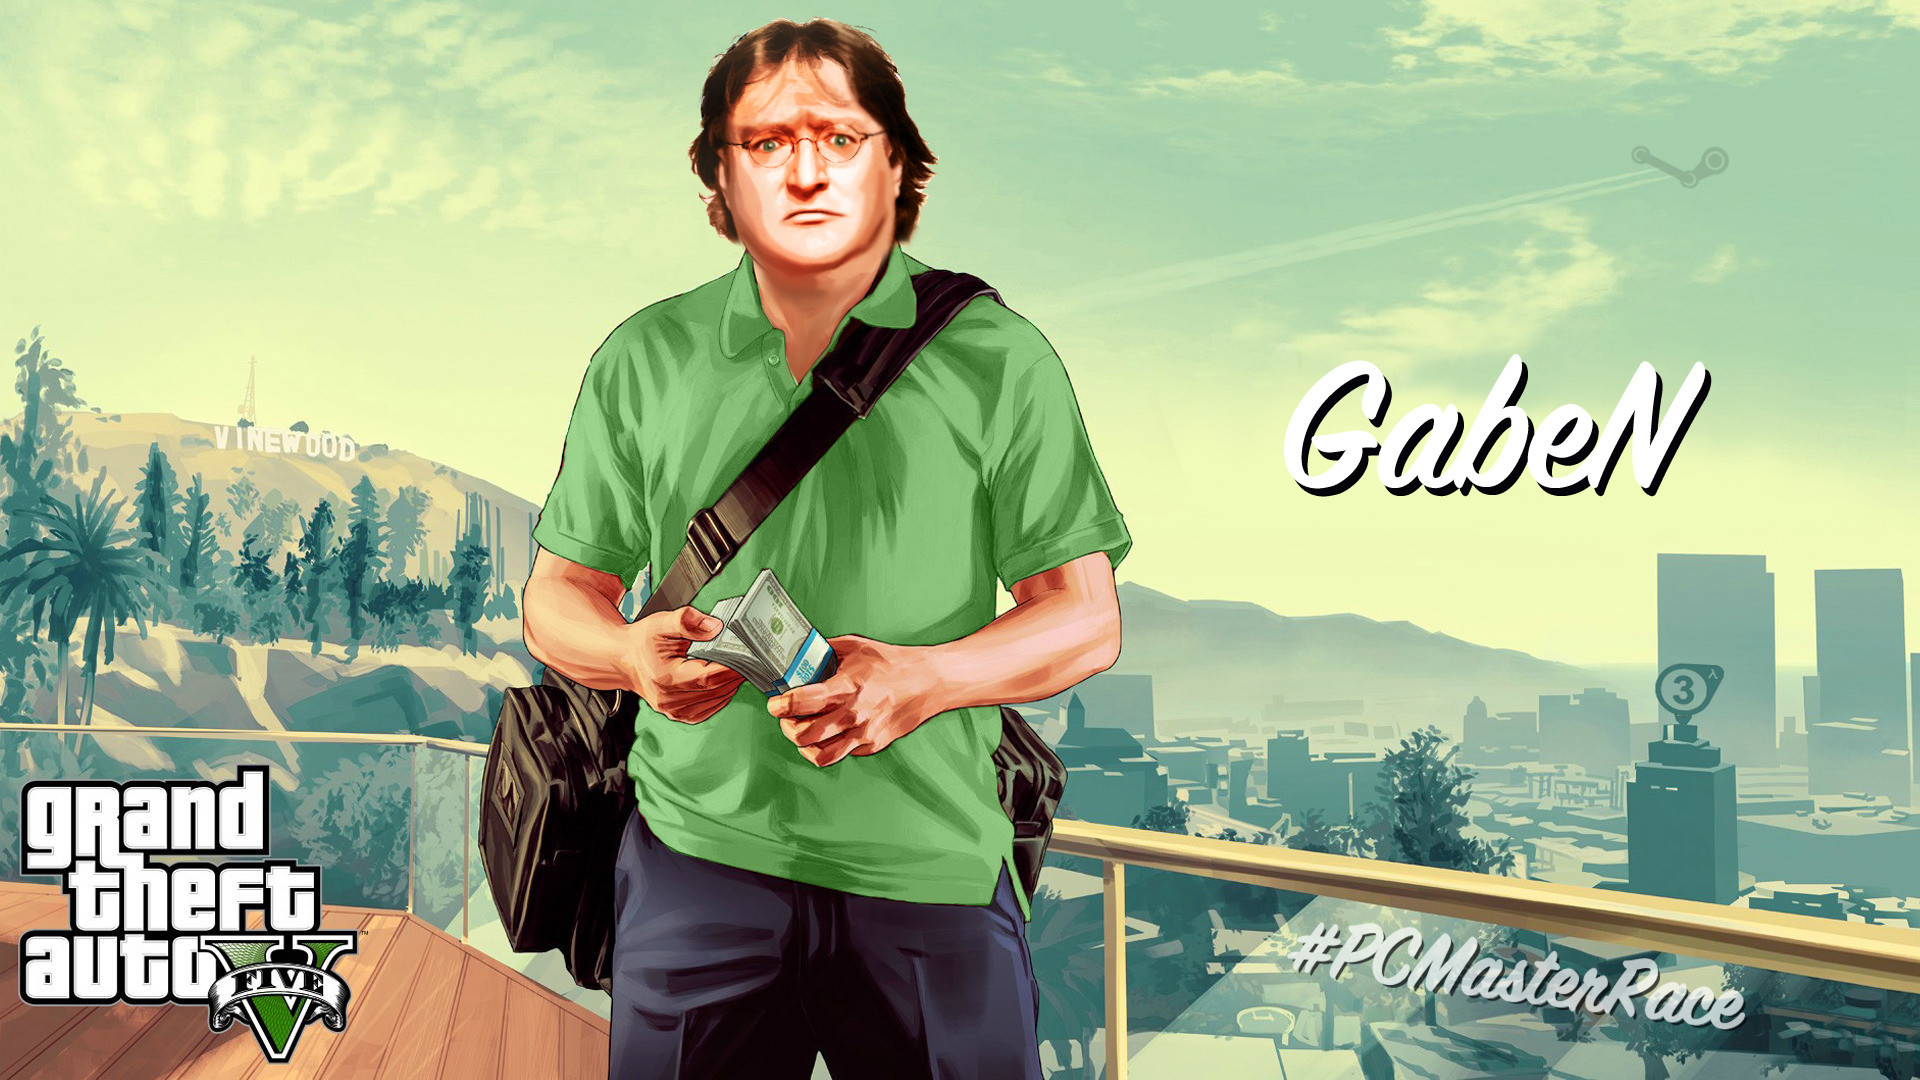 I Made A Glorious Gaben Gta 5 Wallpaper For All Of - Our Lord And Saviour Gaben - HD Wallpaper 